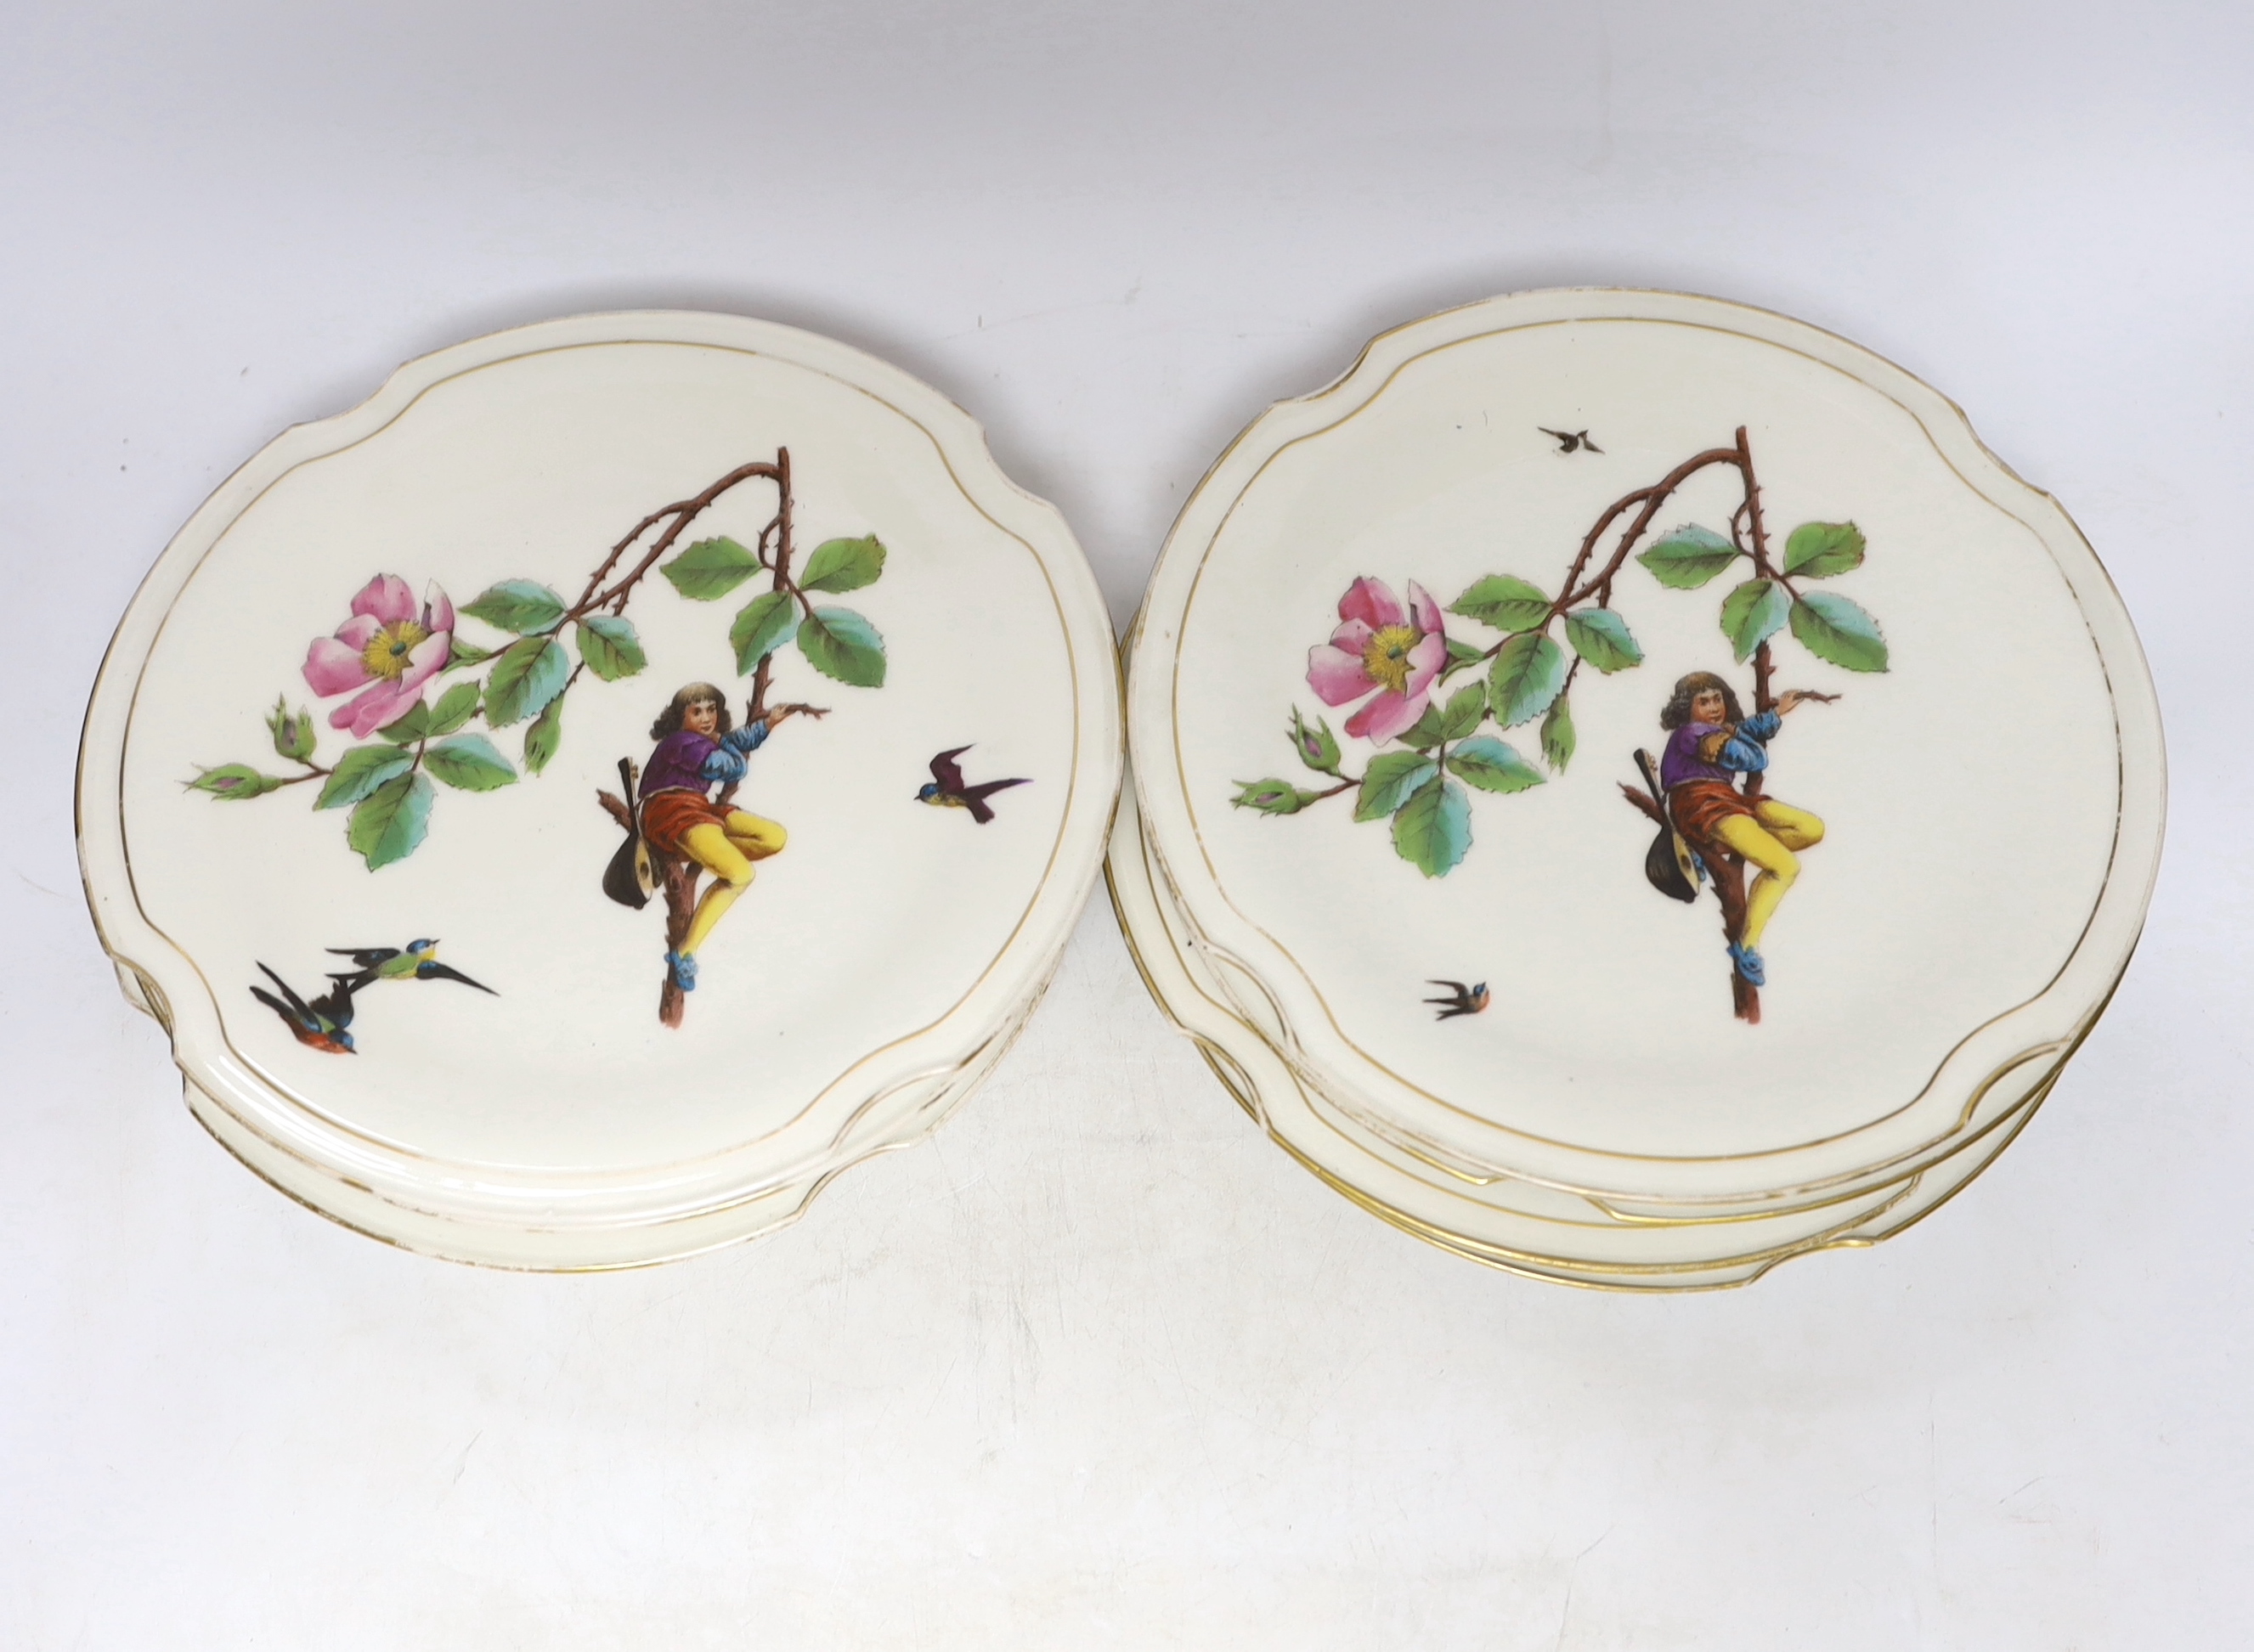 A set of eight late 19th century French Porcelain dessert plates decorated with scenes of figures on branched swings surrounded by flowers, 24cm diameter                                                                   